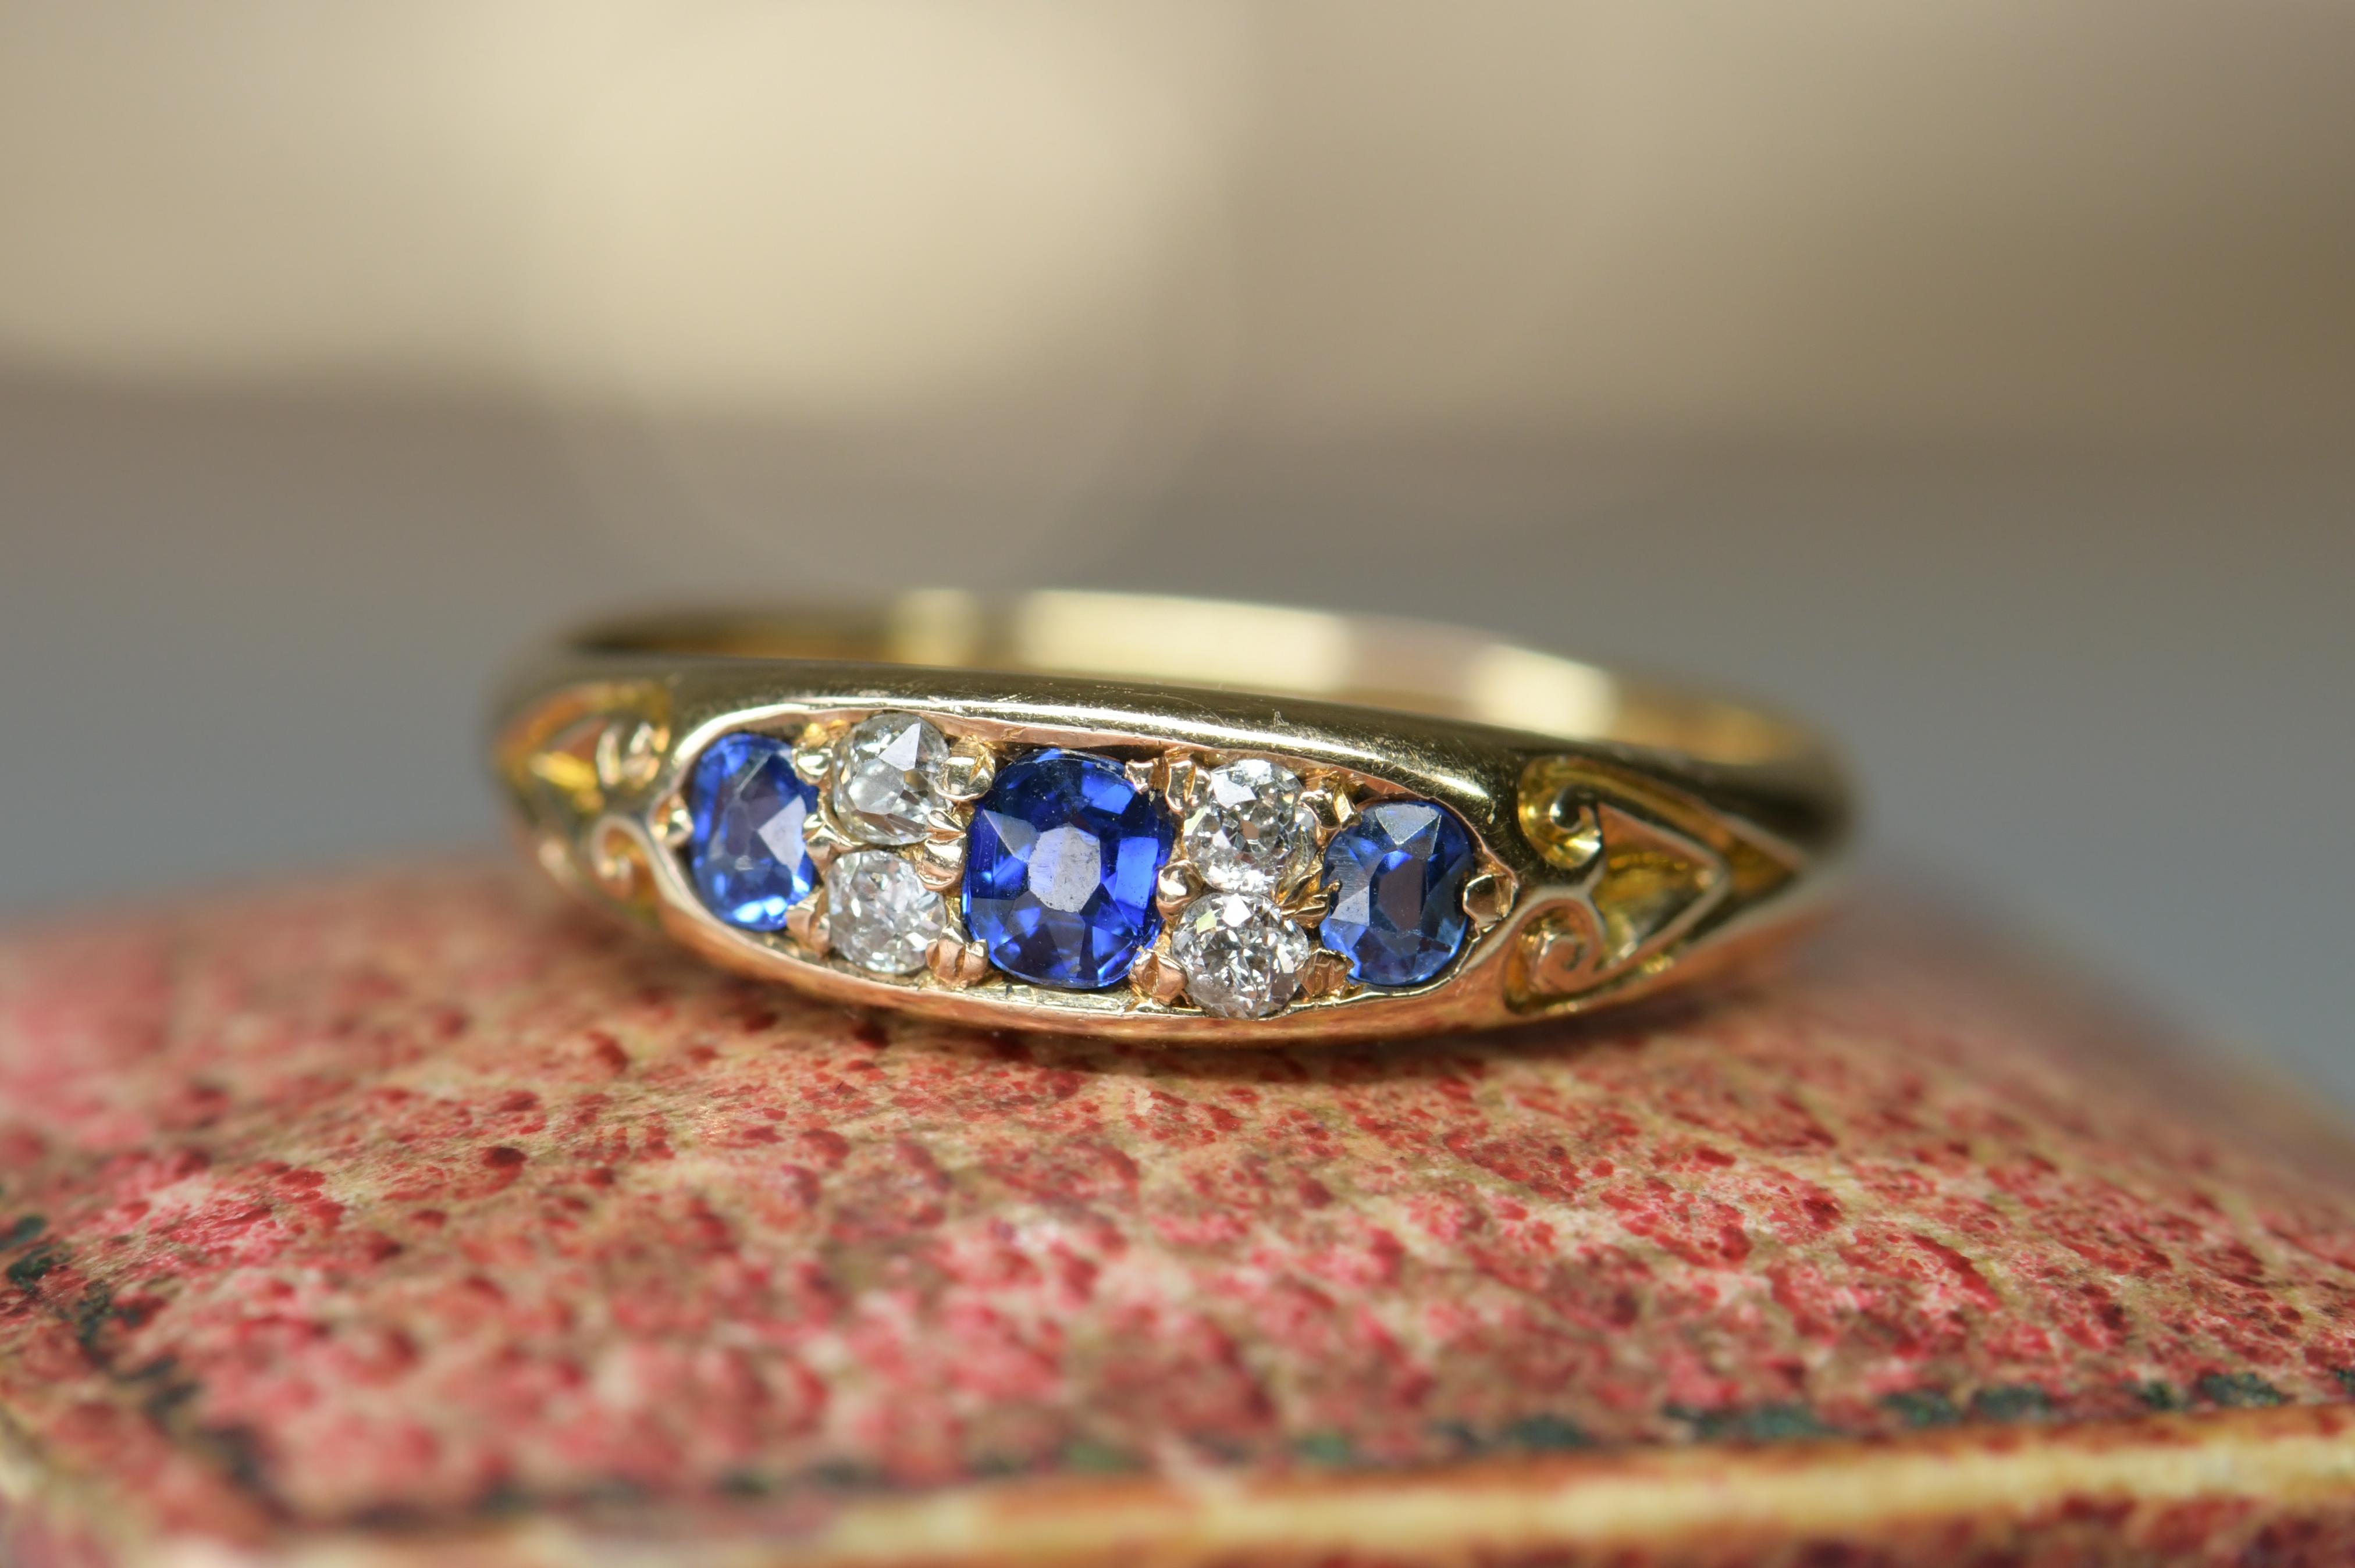 A good looking Victorian 18ct gold ring. It is set with three oval sapphires with small diamonds in between. The shoulders have unusual incised decoration and are very much part of the overall design. It would be ideal as an engagement ring. The